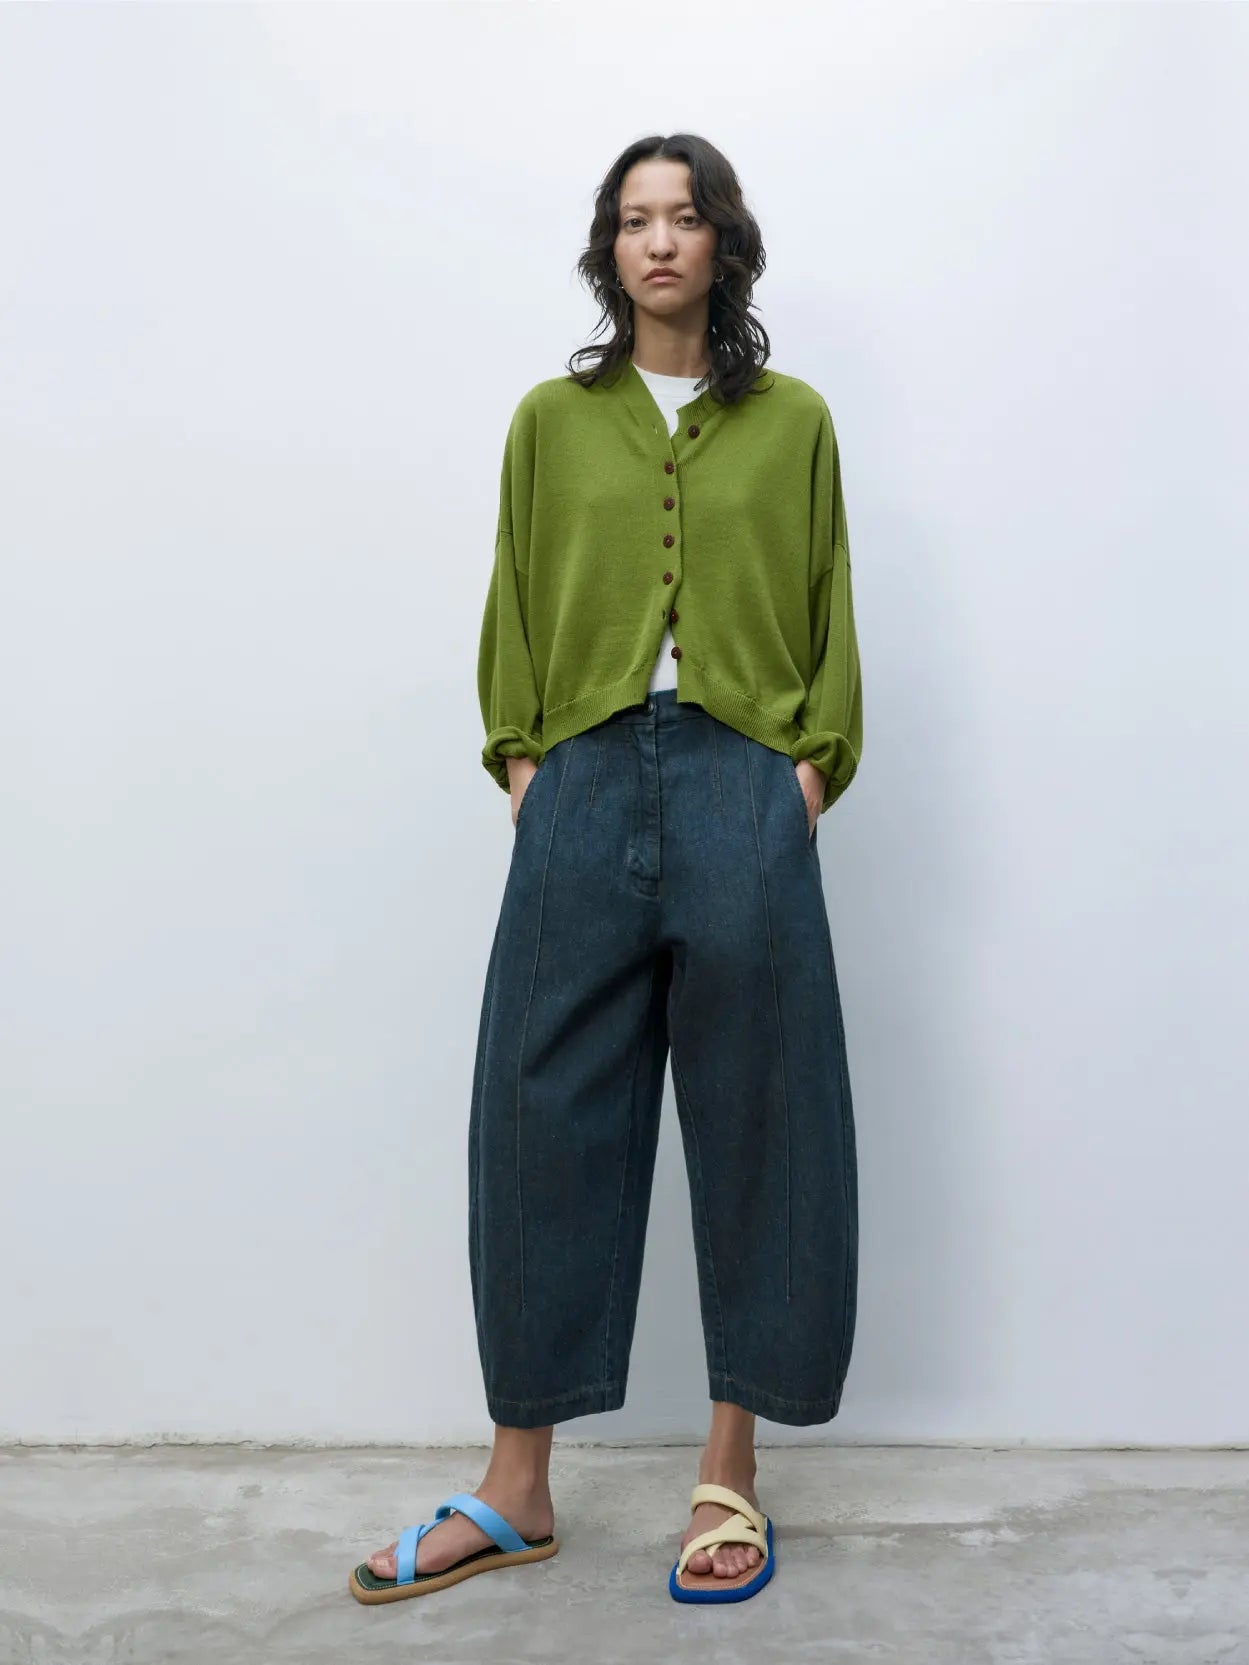 A green cropped cardigan with a V-neckline and brown buttons down the front is featured. The sleeves are long, and the fabric appears to be knit. The Cotton & Cashmere Cardigan Woodbine by cordera, available at Bassalstore Barcelona, has a label at the inner neckline. The background is white.